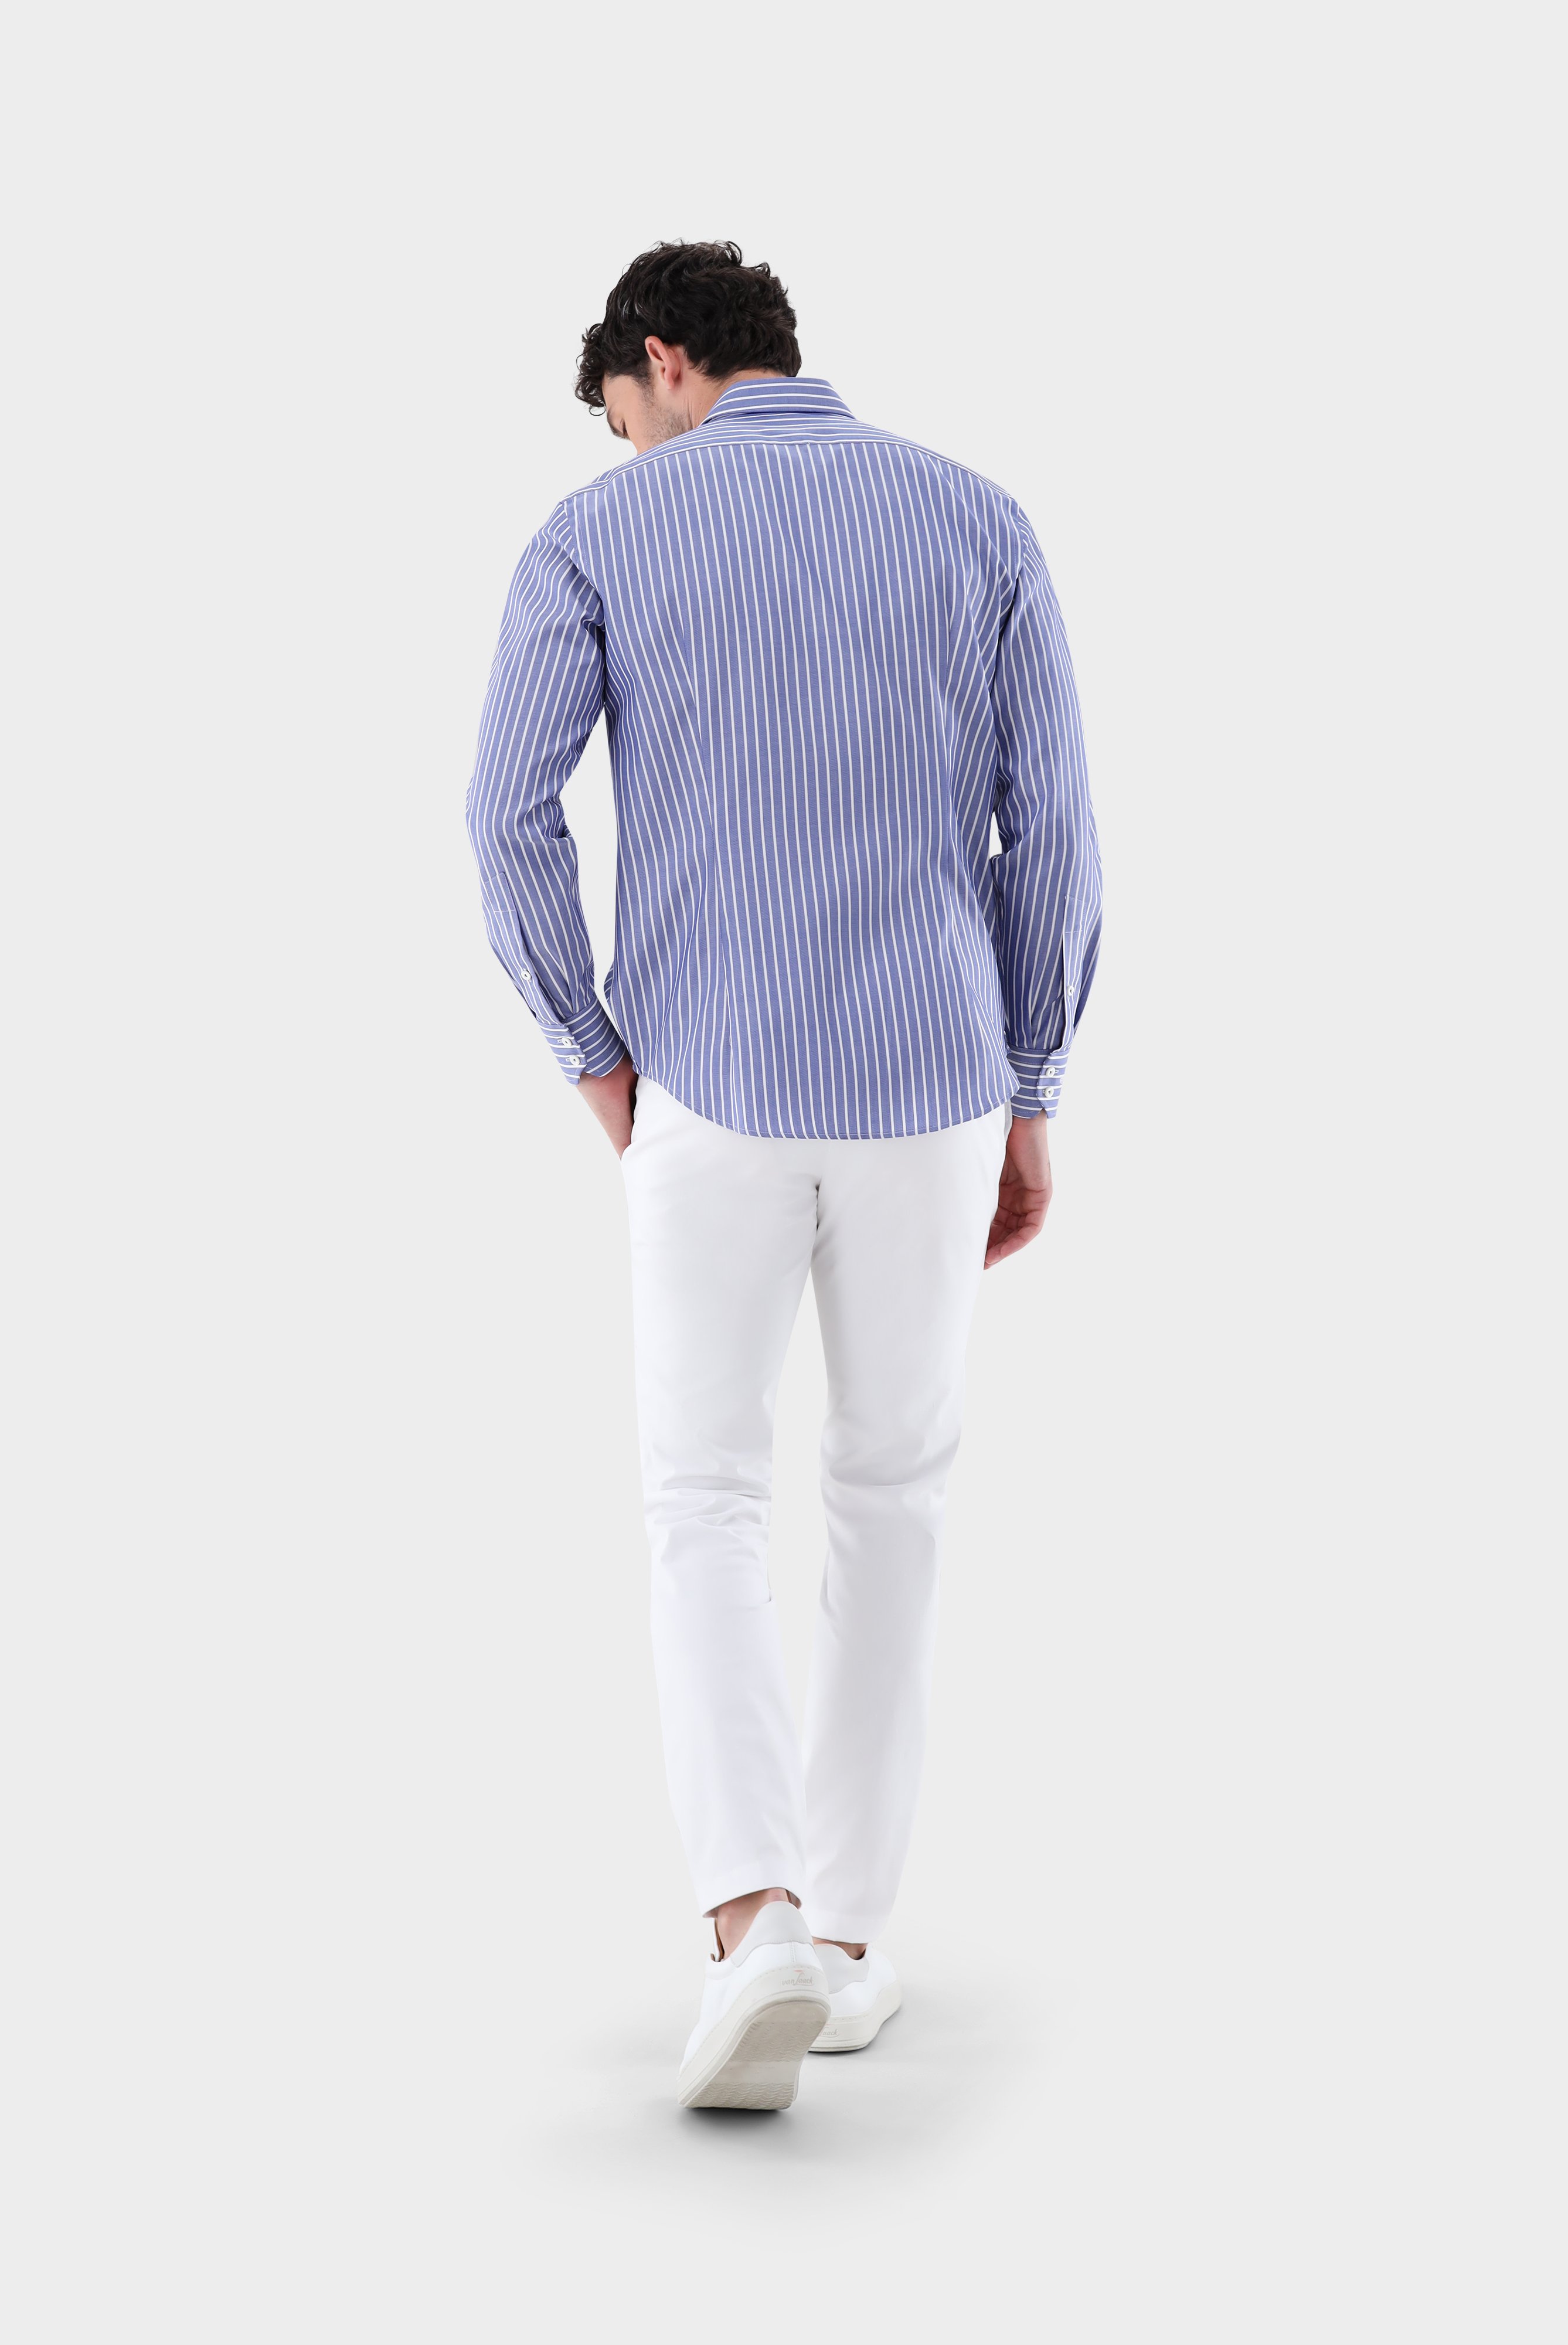 Casual Shirts+Striped Oxford Shirt Tailor Fit+20.2013.AV.151956.770.38